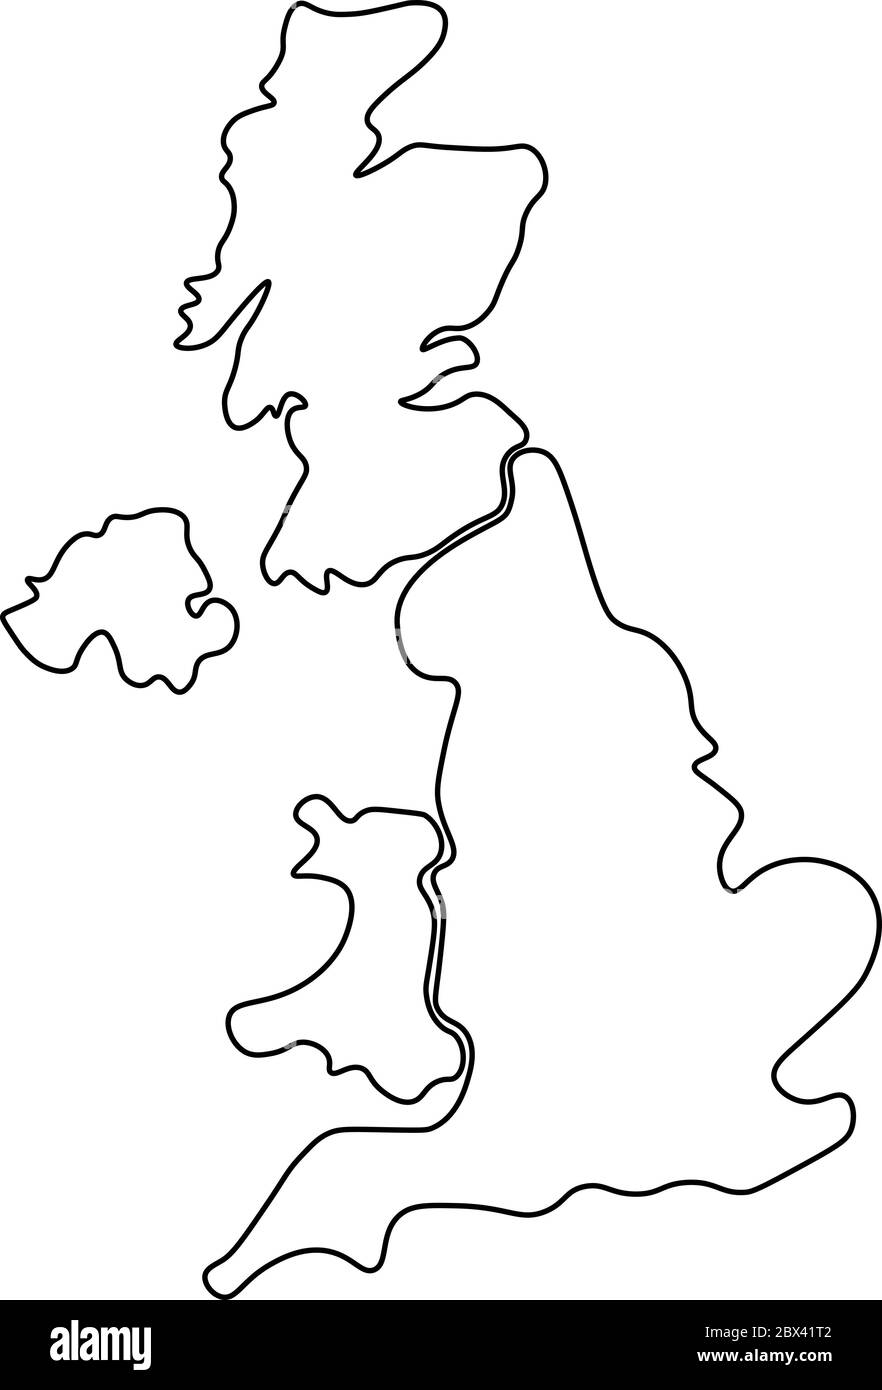 United Kingdom, aka UK, of Great Britain and Northern Ireland hand-drawn blank map. Divided to four countries - England, Wales, Scotland and NI. Simple flat vector illustration. Stock Vector